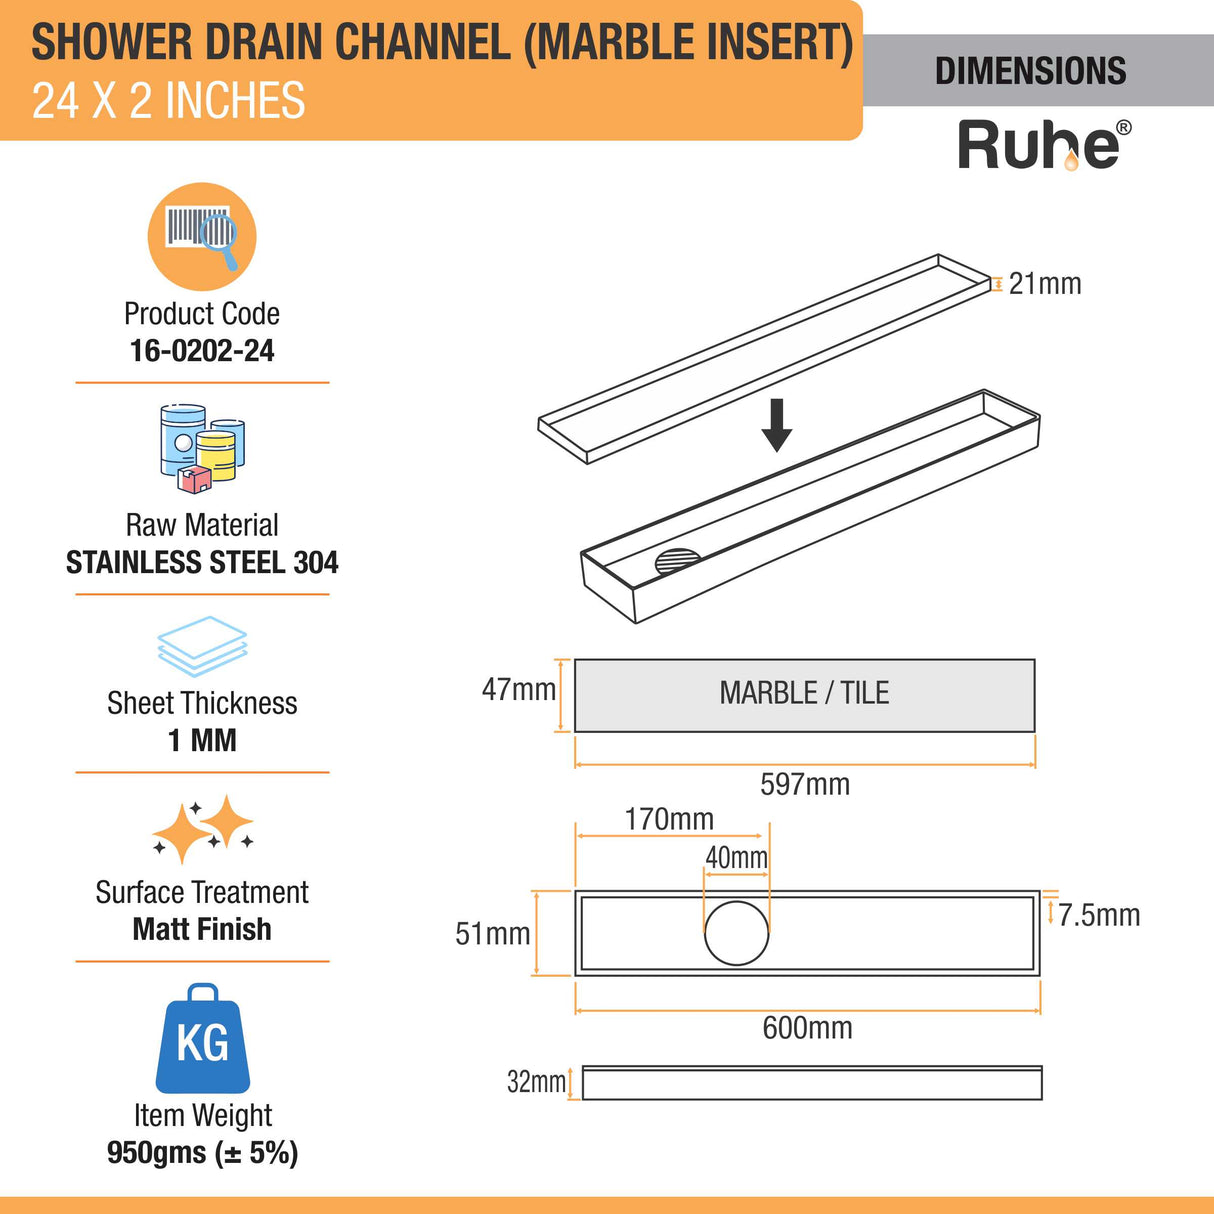 Marble Insert Shower Drain Channel (24 x 2 Inches) (304 Grade) dimensions and size